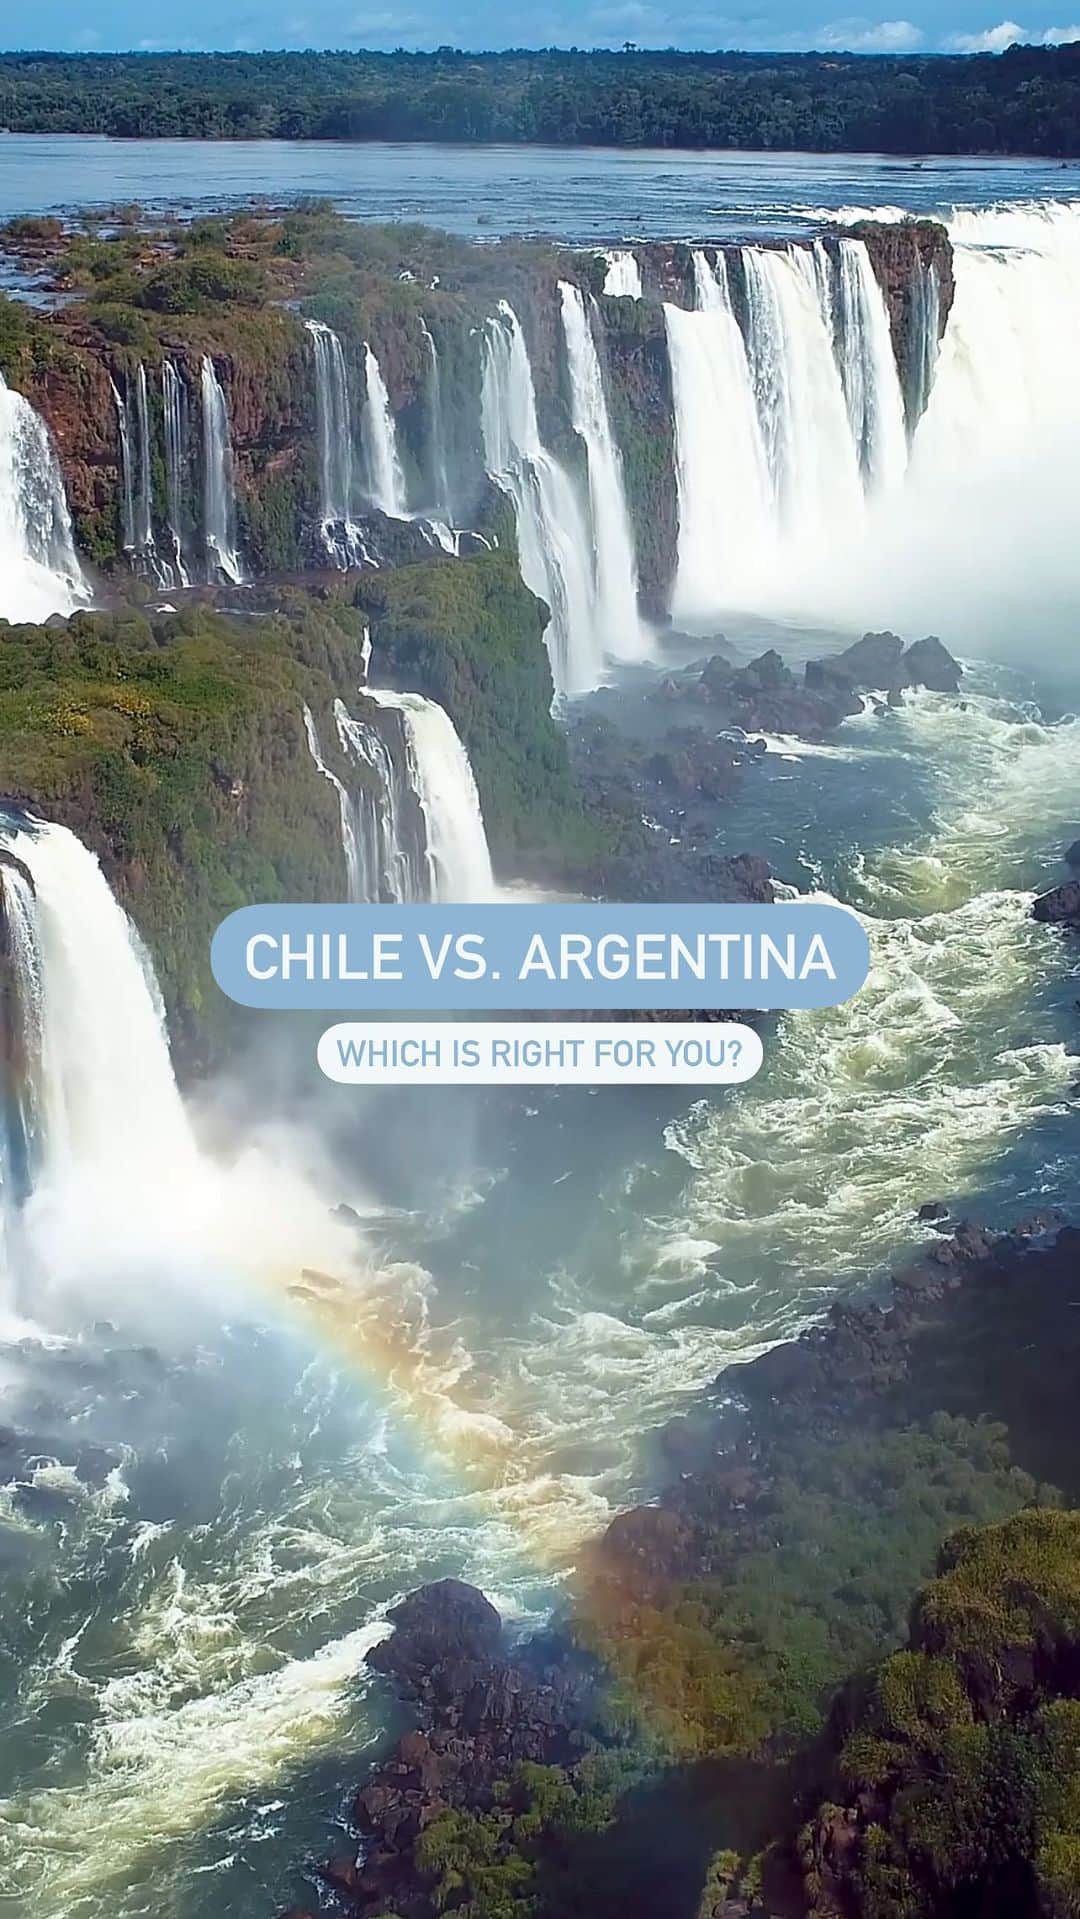 Lonely Planetのインスタグラム：「CHILE or ARGENTINA? 🤔 On one hand, you can surf the Pacific, sand-board through the Atacama Desert and boat across fjords (with a side of Pisco sours). On the other hand, take on Aconcagua, check out Iguazú Falls and wander Buenos Aires (with a side of juicy steaks).  Who are ya picking? Drop a 🇨🇱 or a 🇦🇷 below!」